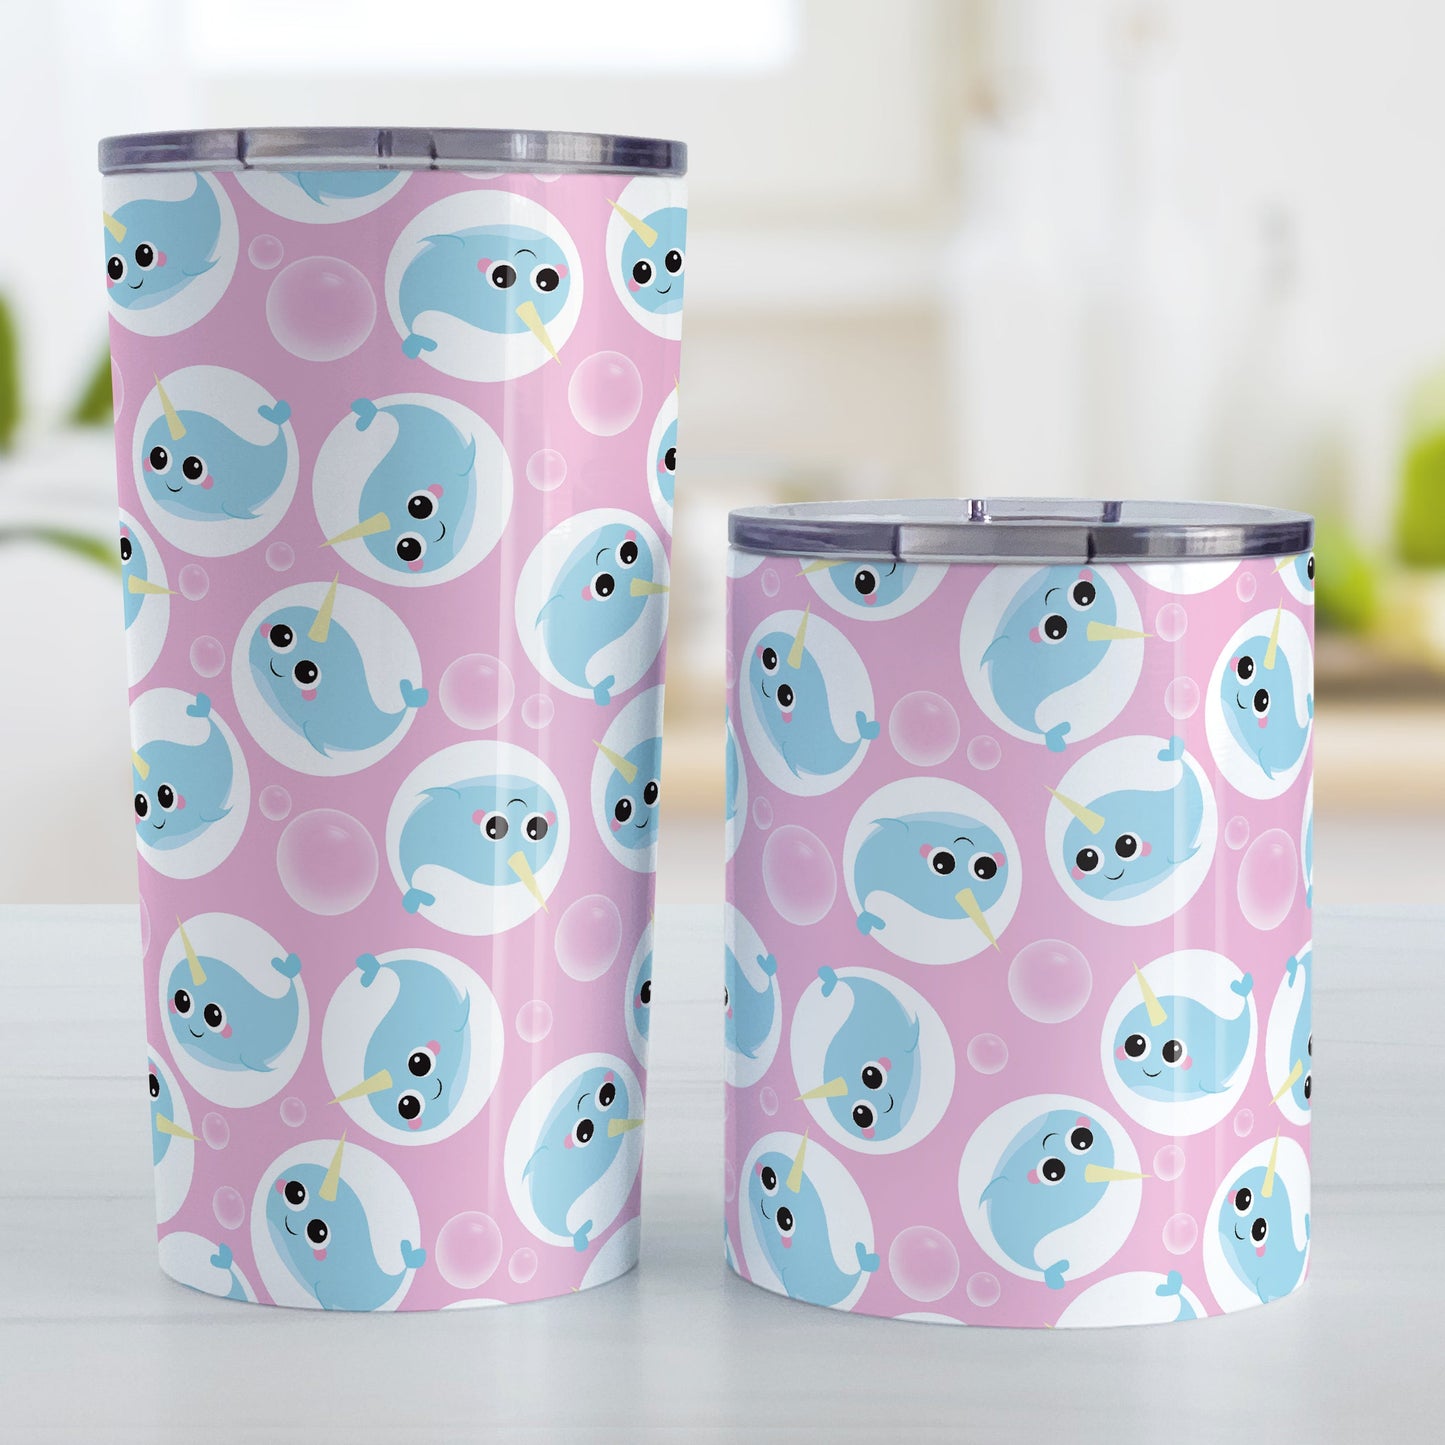 Cute Pink Narwhal Bubble Pattern Tumbler Cup (20oz and 10oz, stainless steel insulated) at Amy's Coffee Mugs